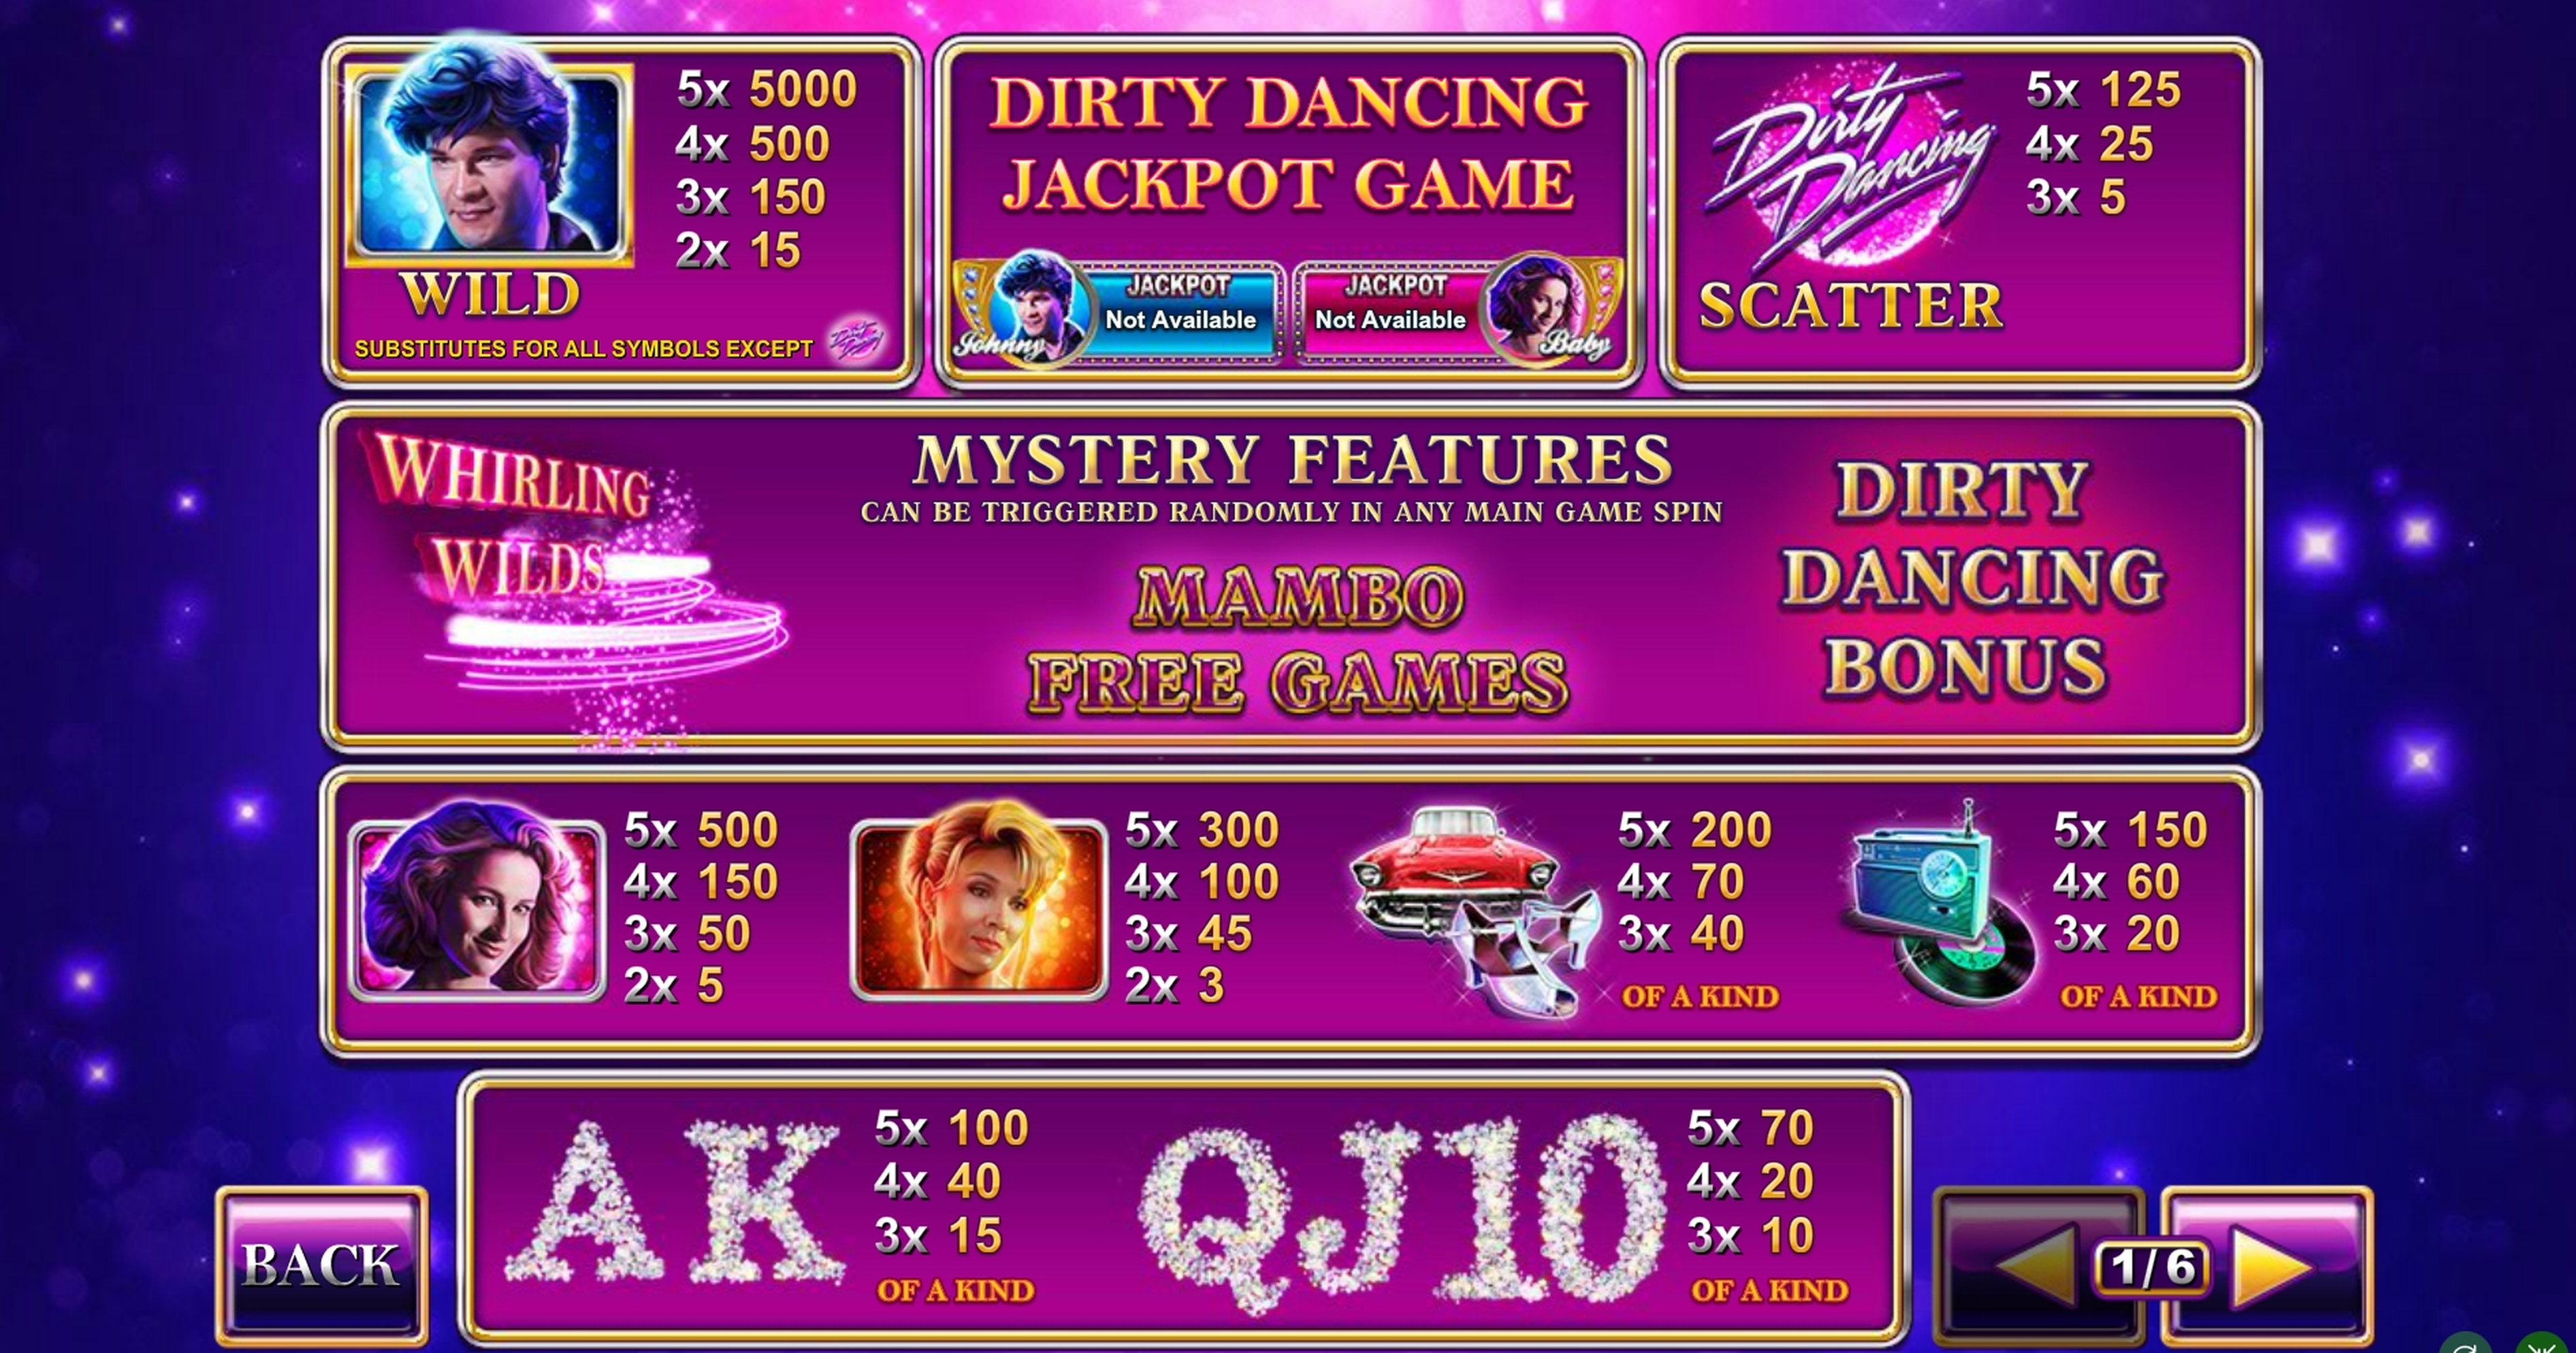 Info of Dirty Dancing Slot Game by Playtech